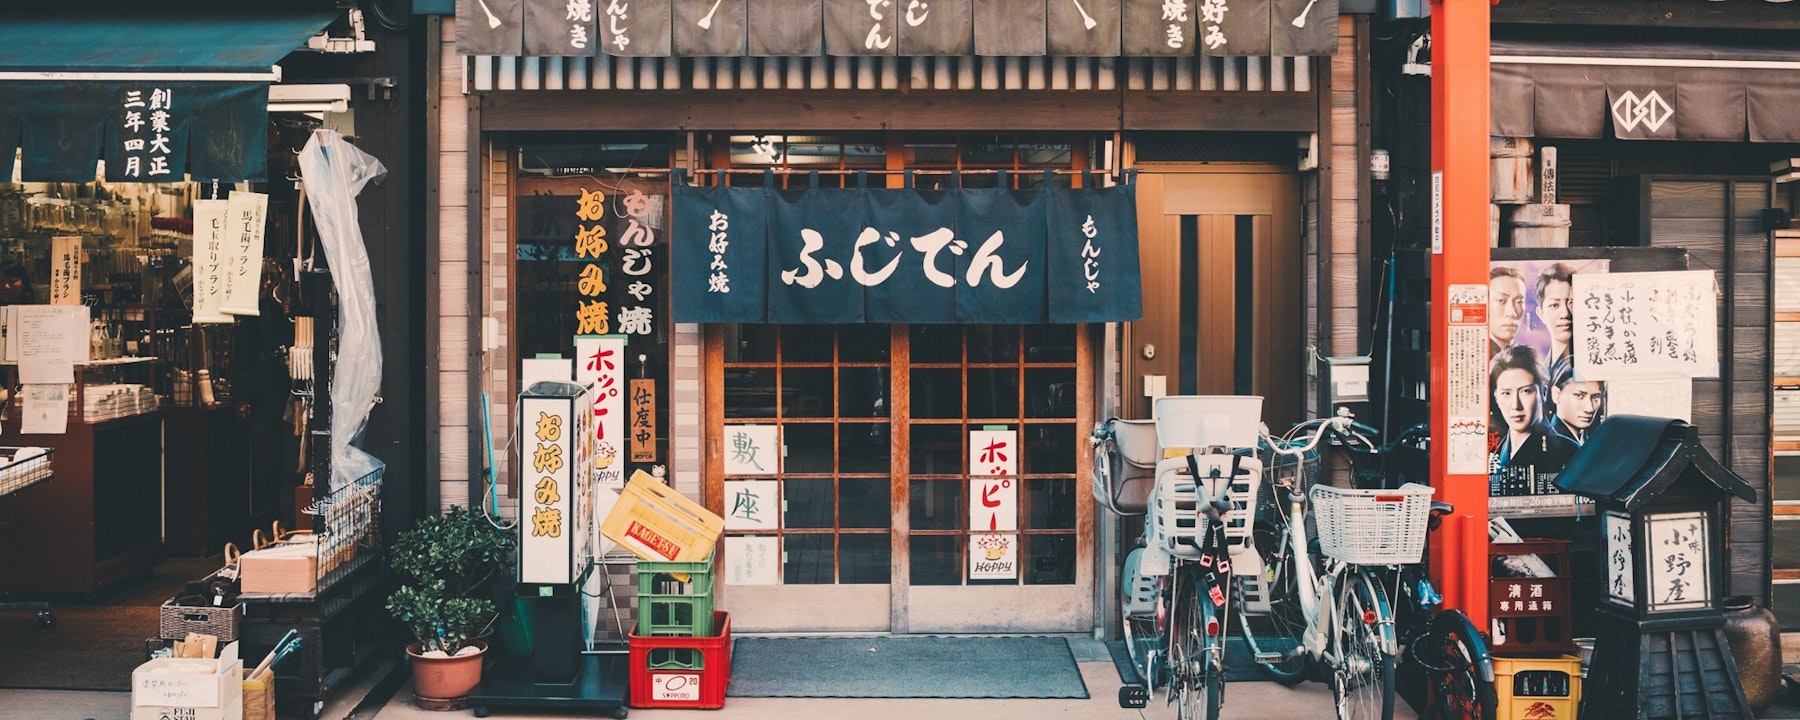 7 Famous Restaurants In Tokyo With A Fascinating History